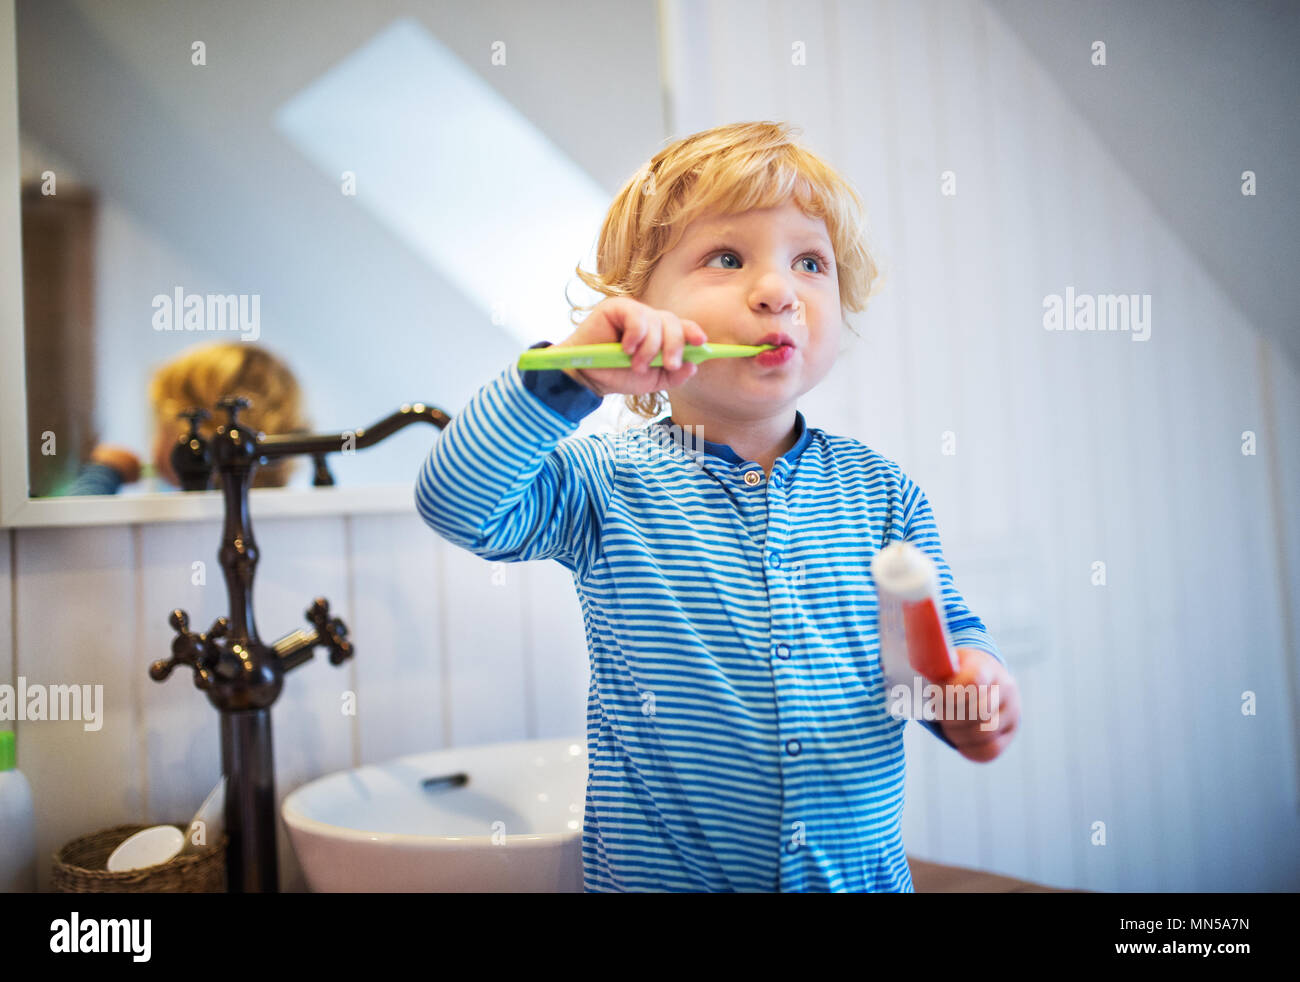 Cute toddler brushing his teeth in the bathroom. Little boy standing on a stool. Stock Photo